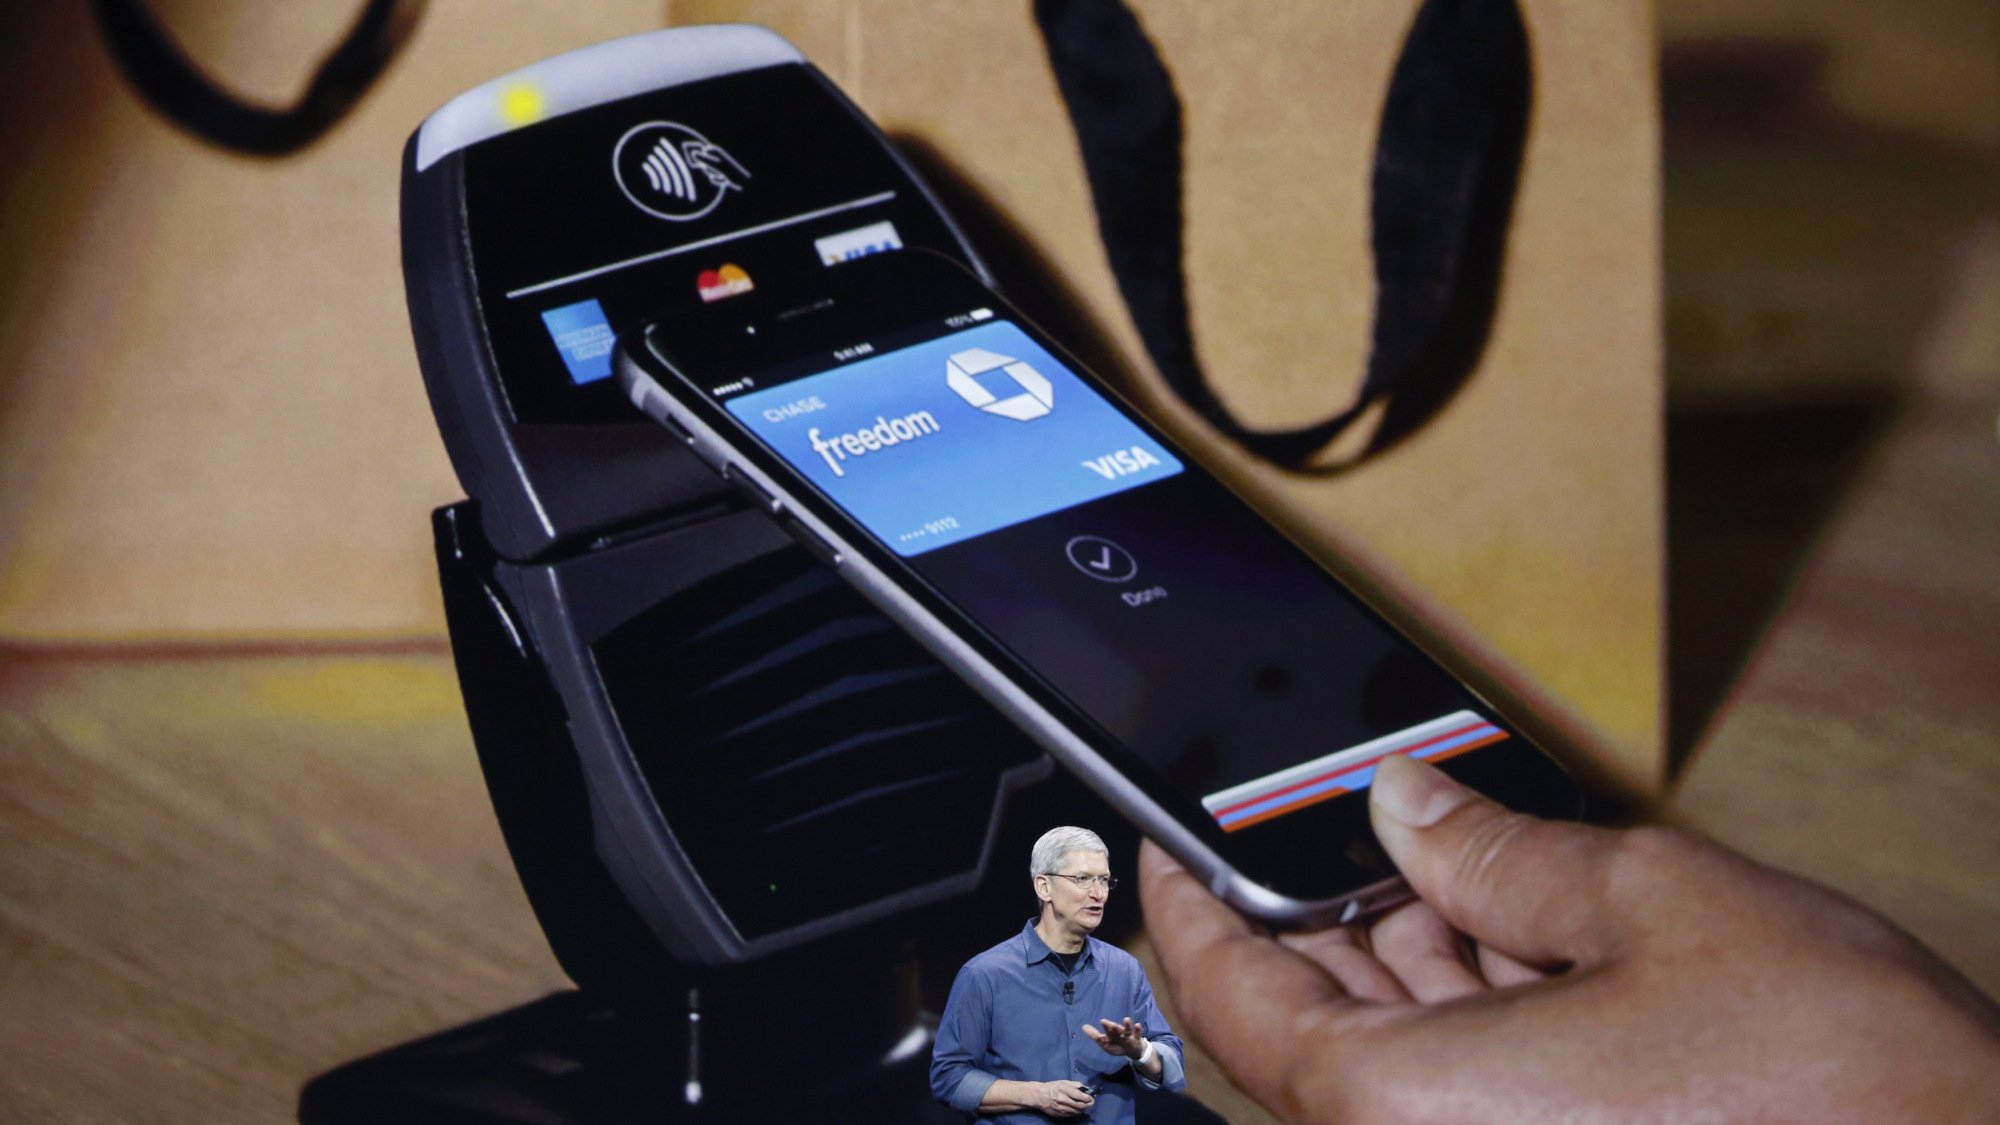 Apple to Implement Mobile Payment Service in China